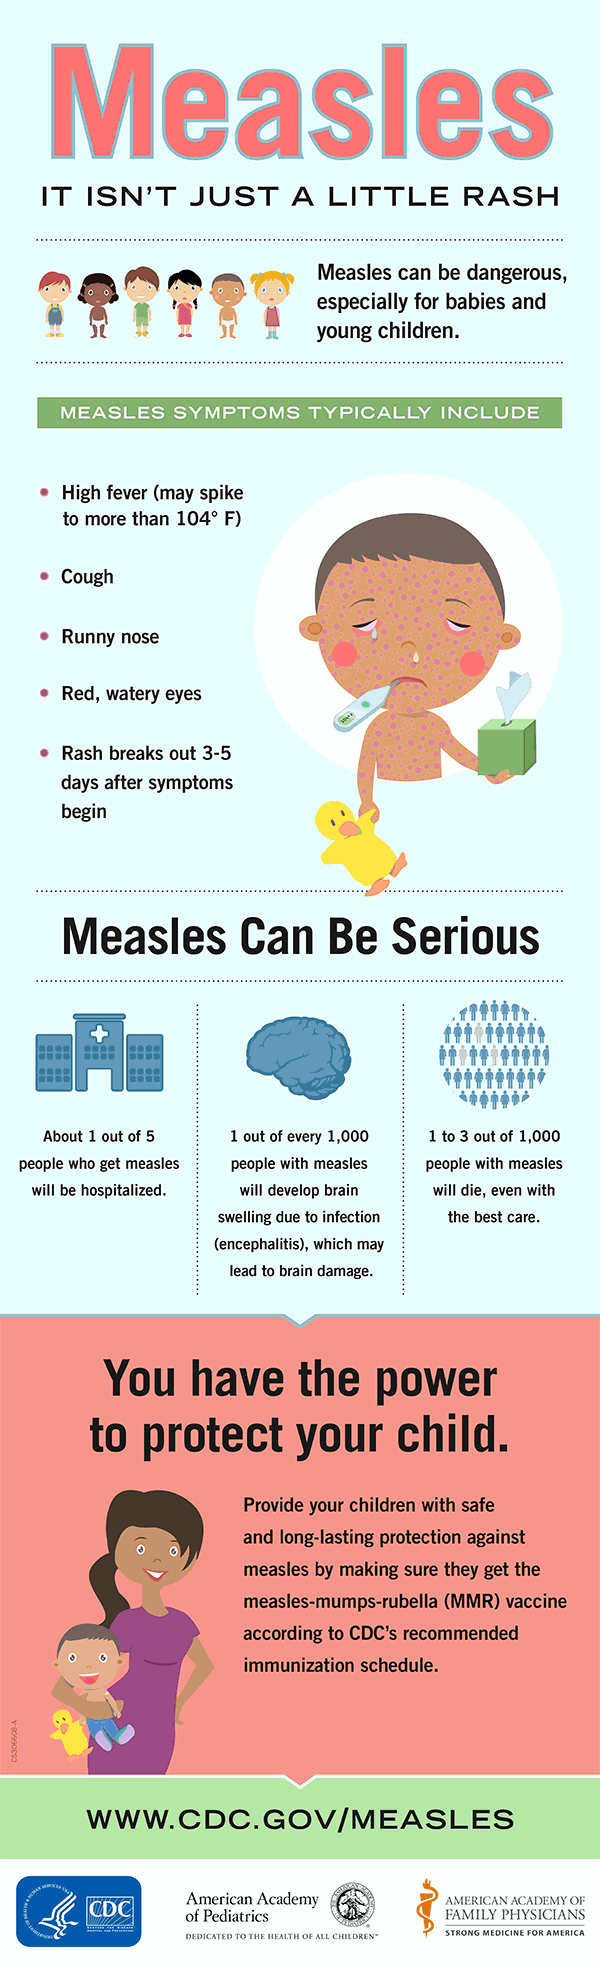 Infographic. Measles: it isn%26rsquo;t just a little rash. Measles can be dangerous, especially for babies and young children. Measles symptoms typically include high fever (may spike to more than 104 degrees F), cough, runny nose, red watery eyes; rash breaks out 3-6 days after symptoms begin. Measles can be serious. About 1 out of 4 people who get measles will be hospitalized. 1 out of every 1,000 people with measles will develop brain swelling (encephalitis), which may lead to brain damage. 1 or 2 out of 1,000 people with measles will die, even with the best care. You have the power to protect your child. Provide your children with safe and long-lasting protection agains measles by making sure they get the measles-mumps-rubella (MMR) vaccine according to CDC%26rsquo;s recommended immunization schedule.